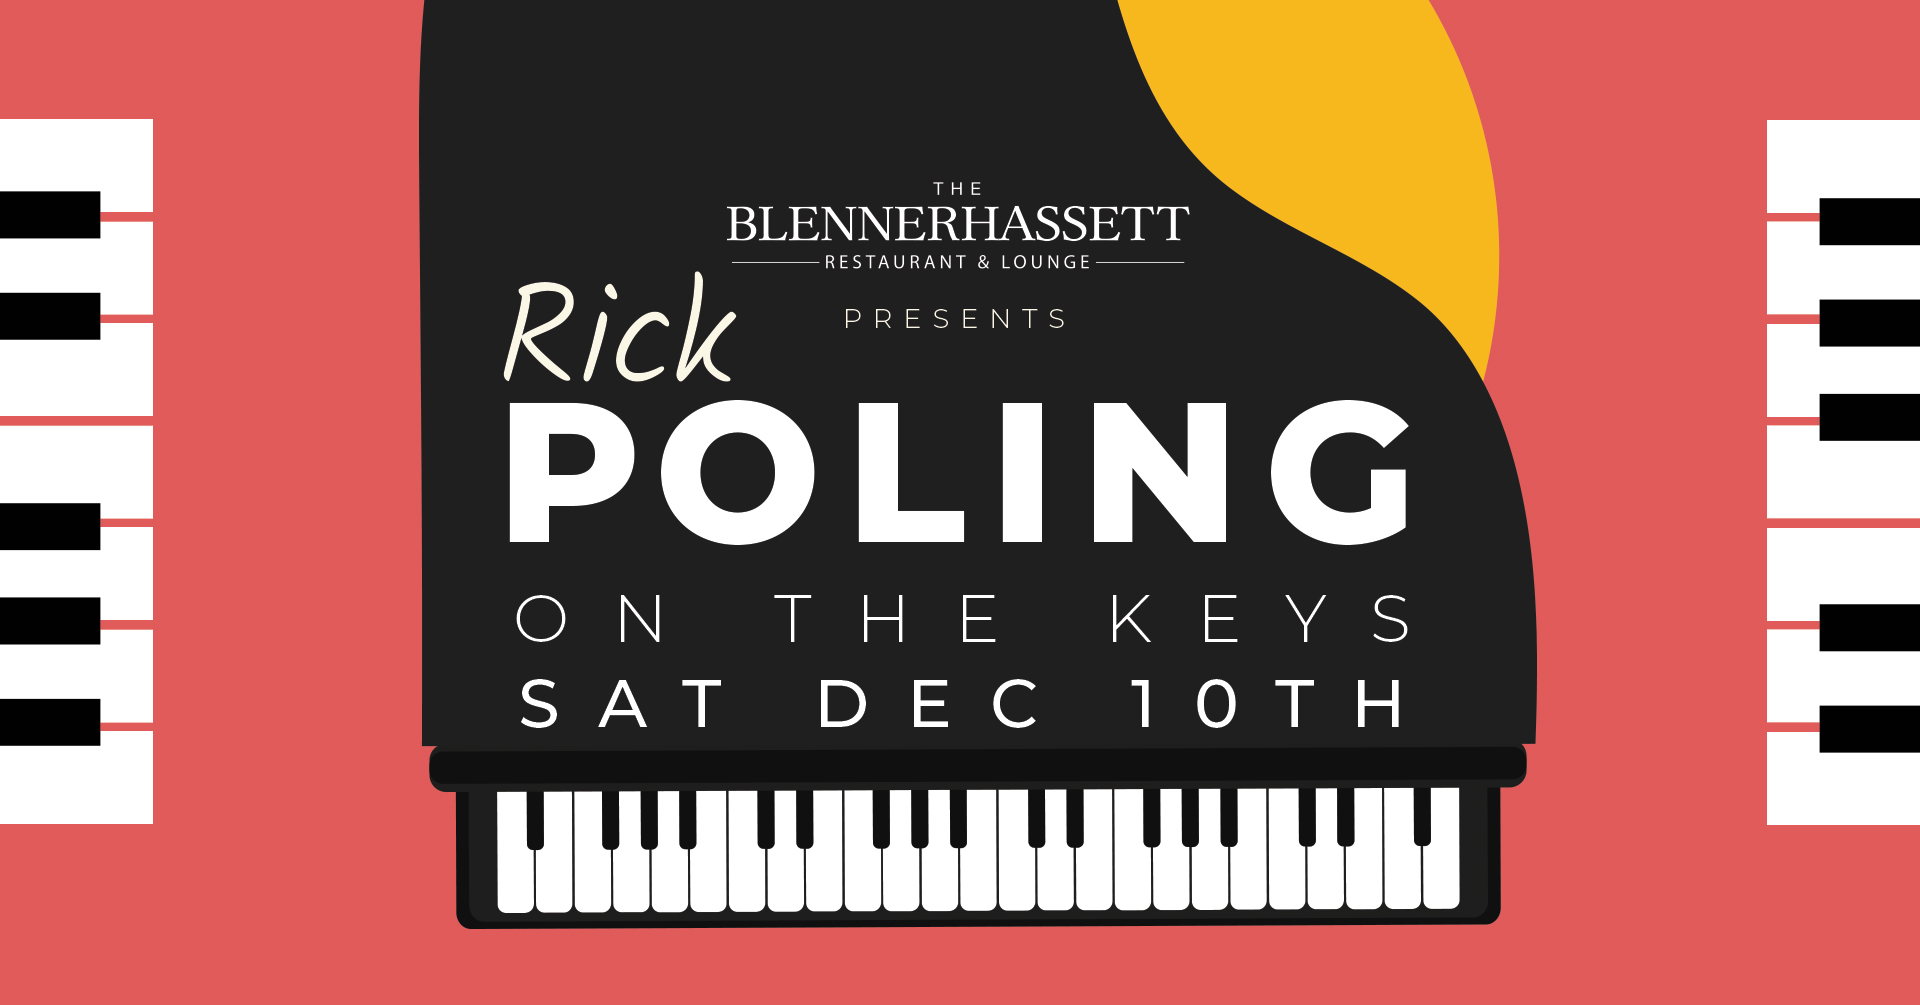 Rick Poling plays piano at The Blennerhassett Hotel and Spa on Dec 10th